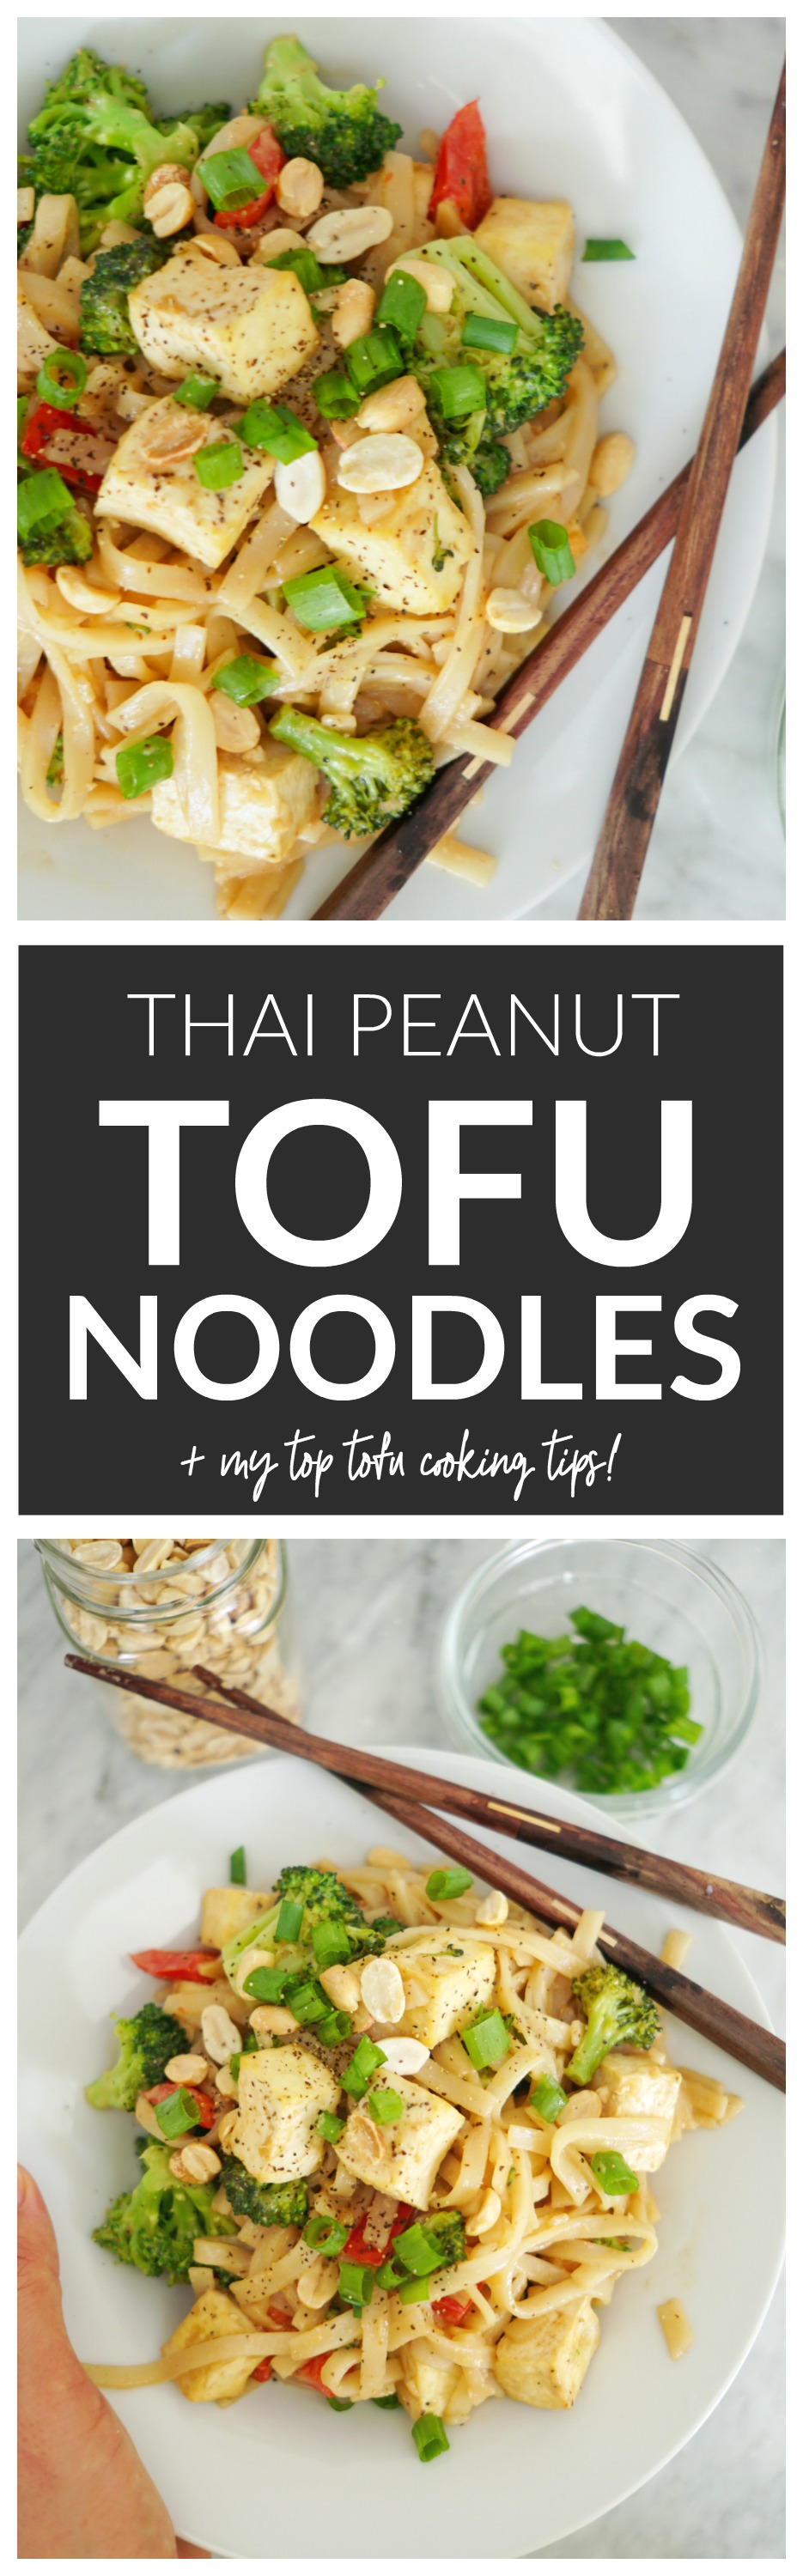 Thai Peanut Tofu Noodles Recipe + top tips for perfectly cooked tofu every time!